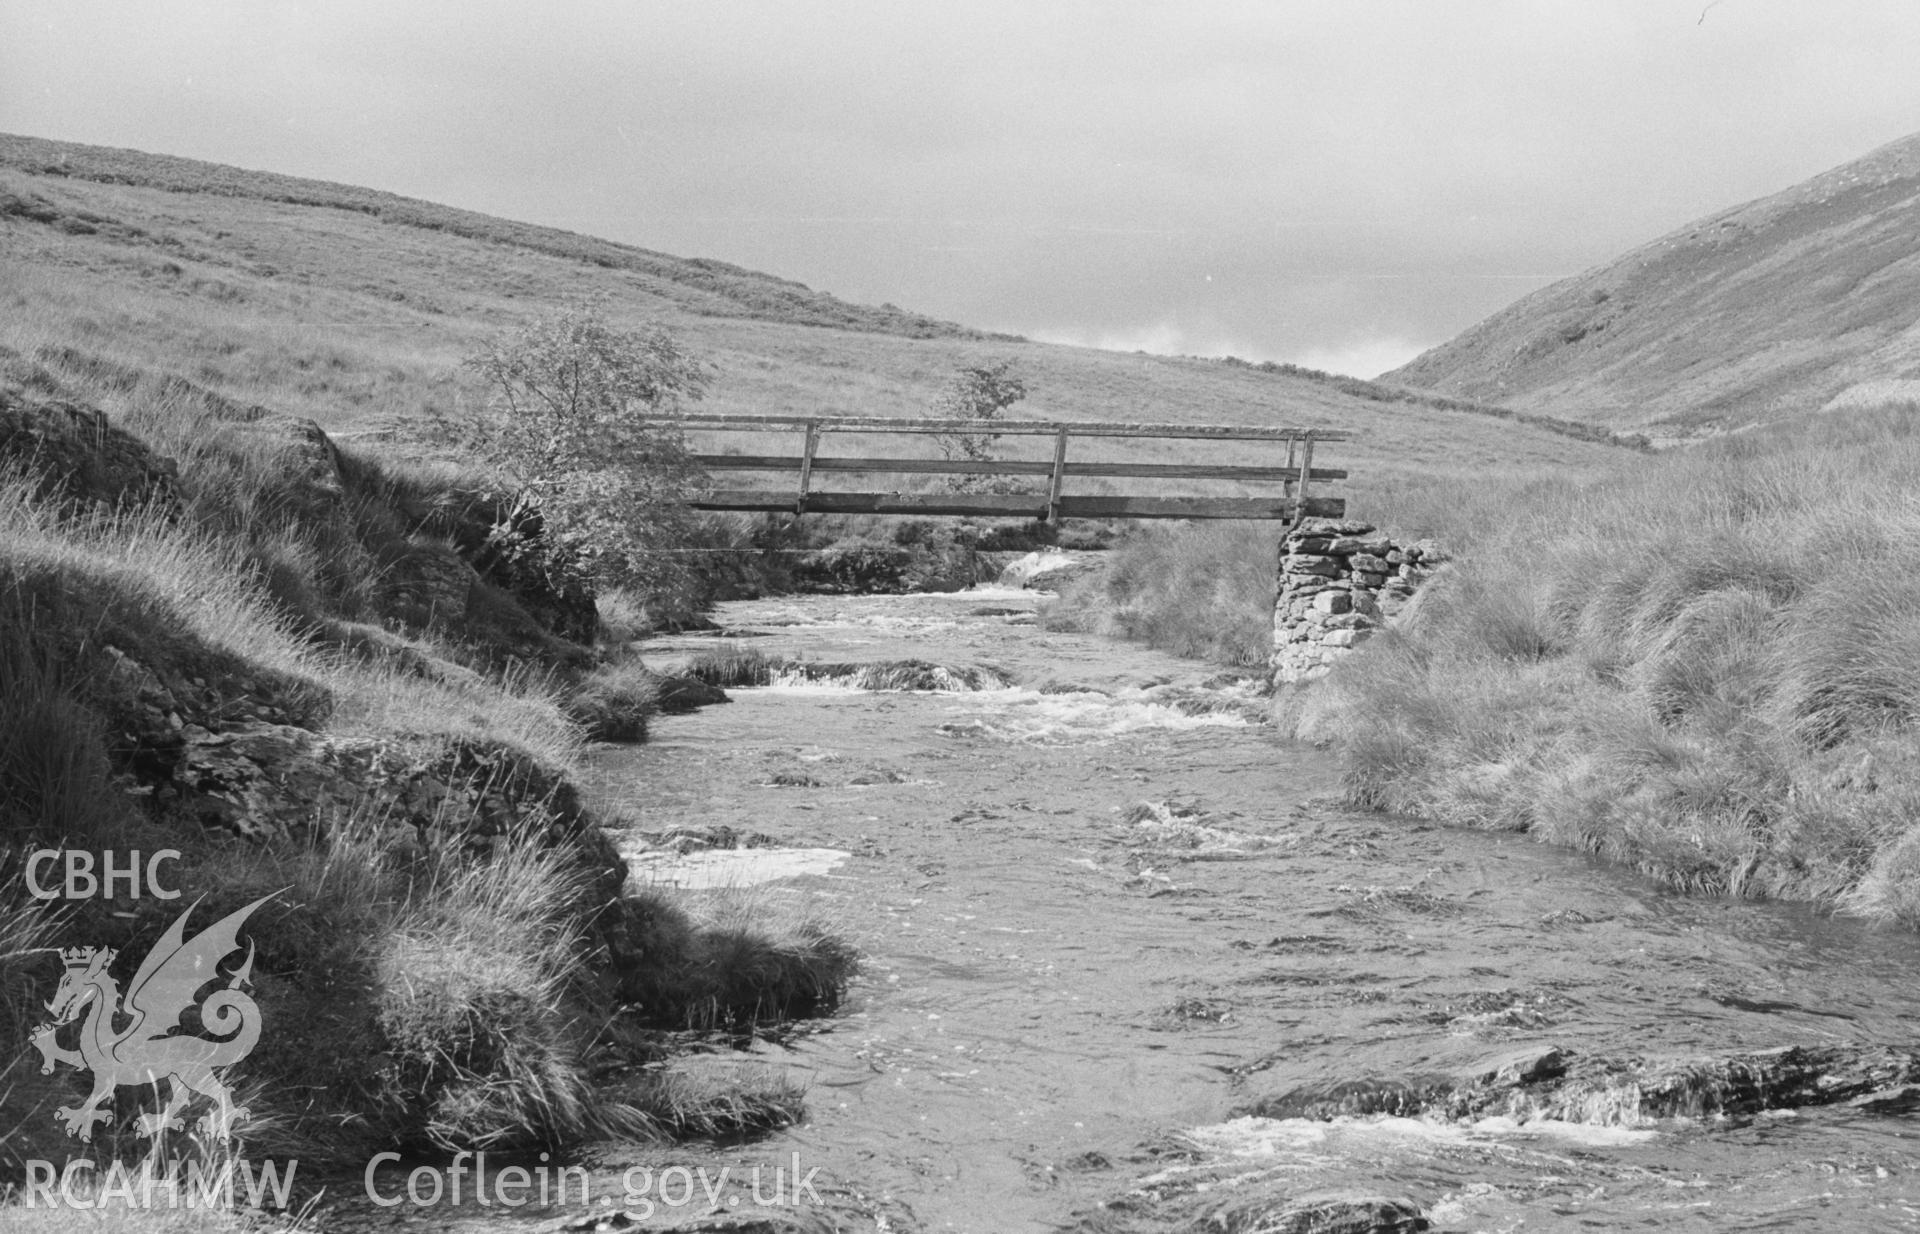 Digital copy of black & white negative showing wooden footbridge with dry-stone abutments across the Camddwr, 100m above Capel Soar-y-Mynydd, Llanddewi Brefi. Photographed in September 1963 by Arthur O. Chater from Grid Ref SN78485337, looking north west.